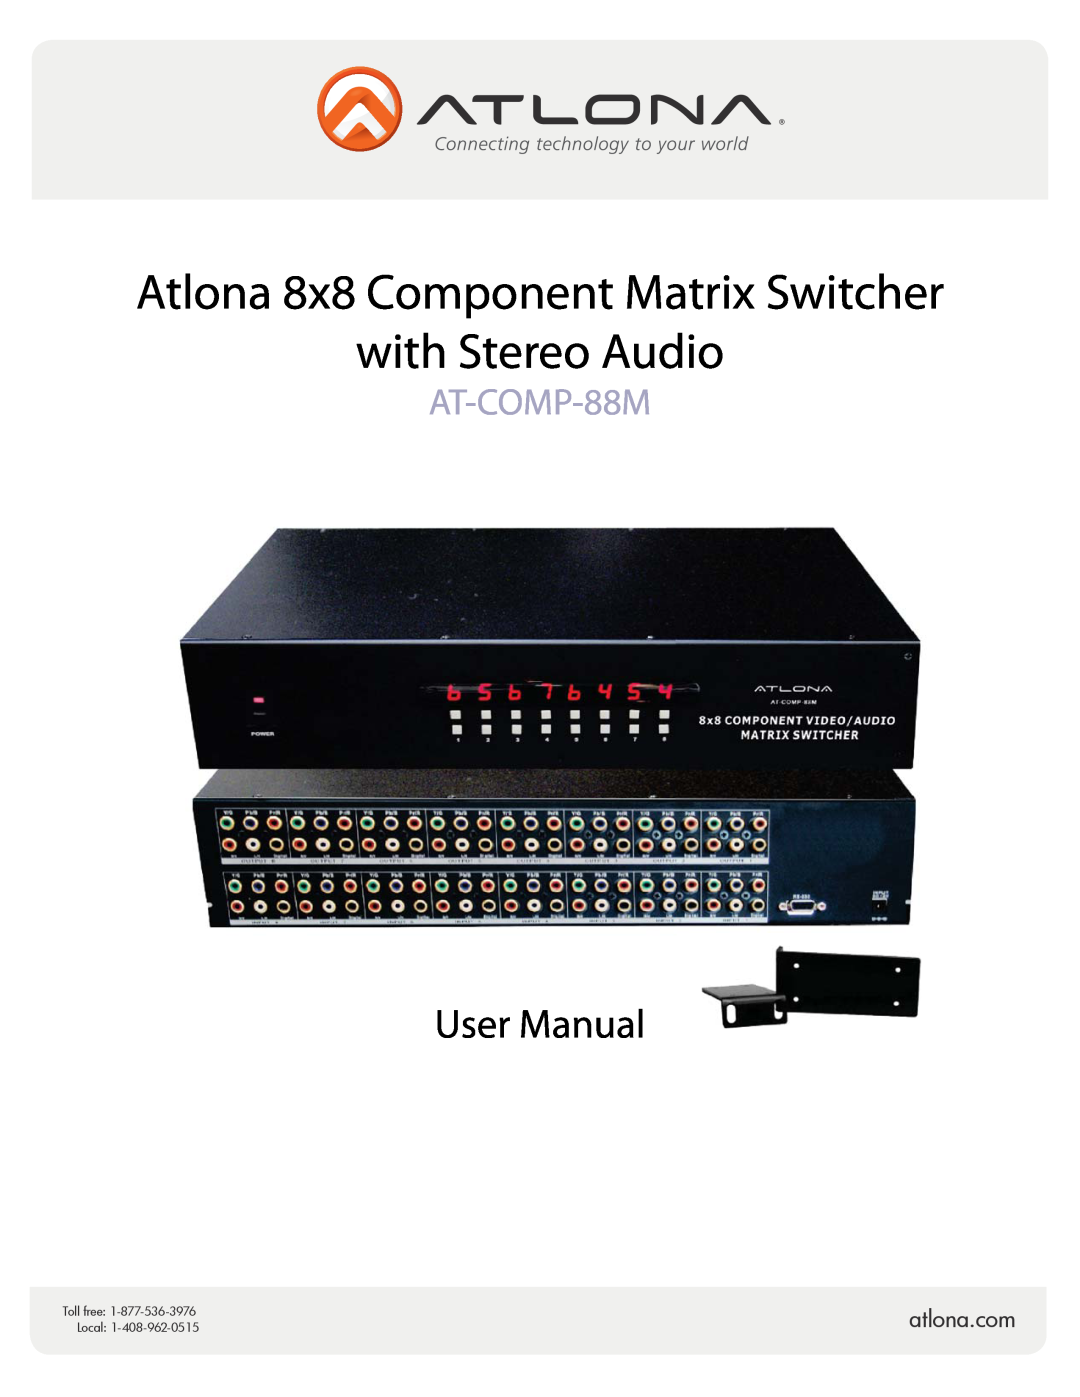 Atlona user manual AtlonA, 8x8 Component Matrix Switcher with Stereo Audio AT-COMP-88M 